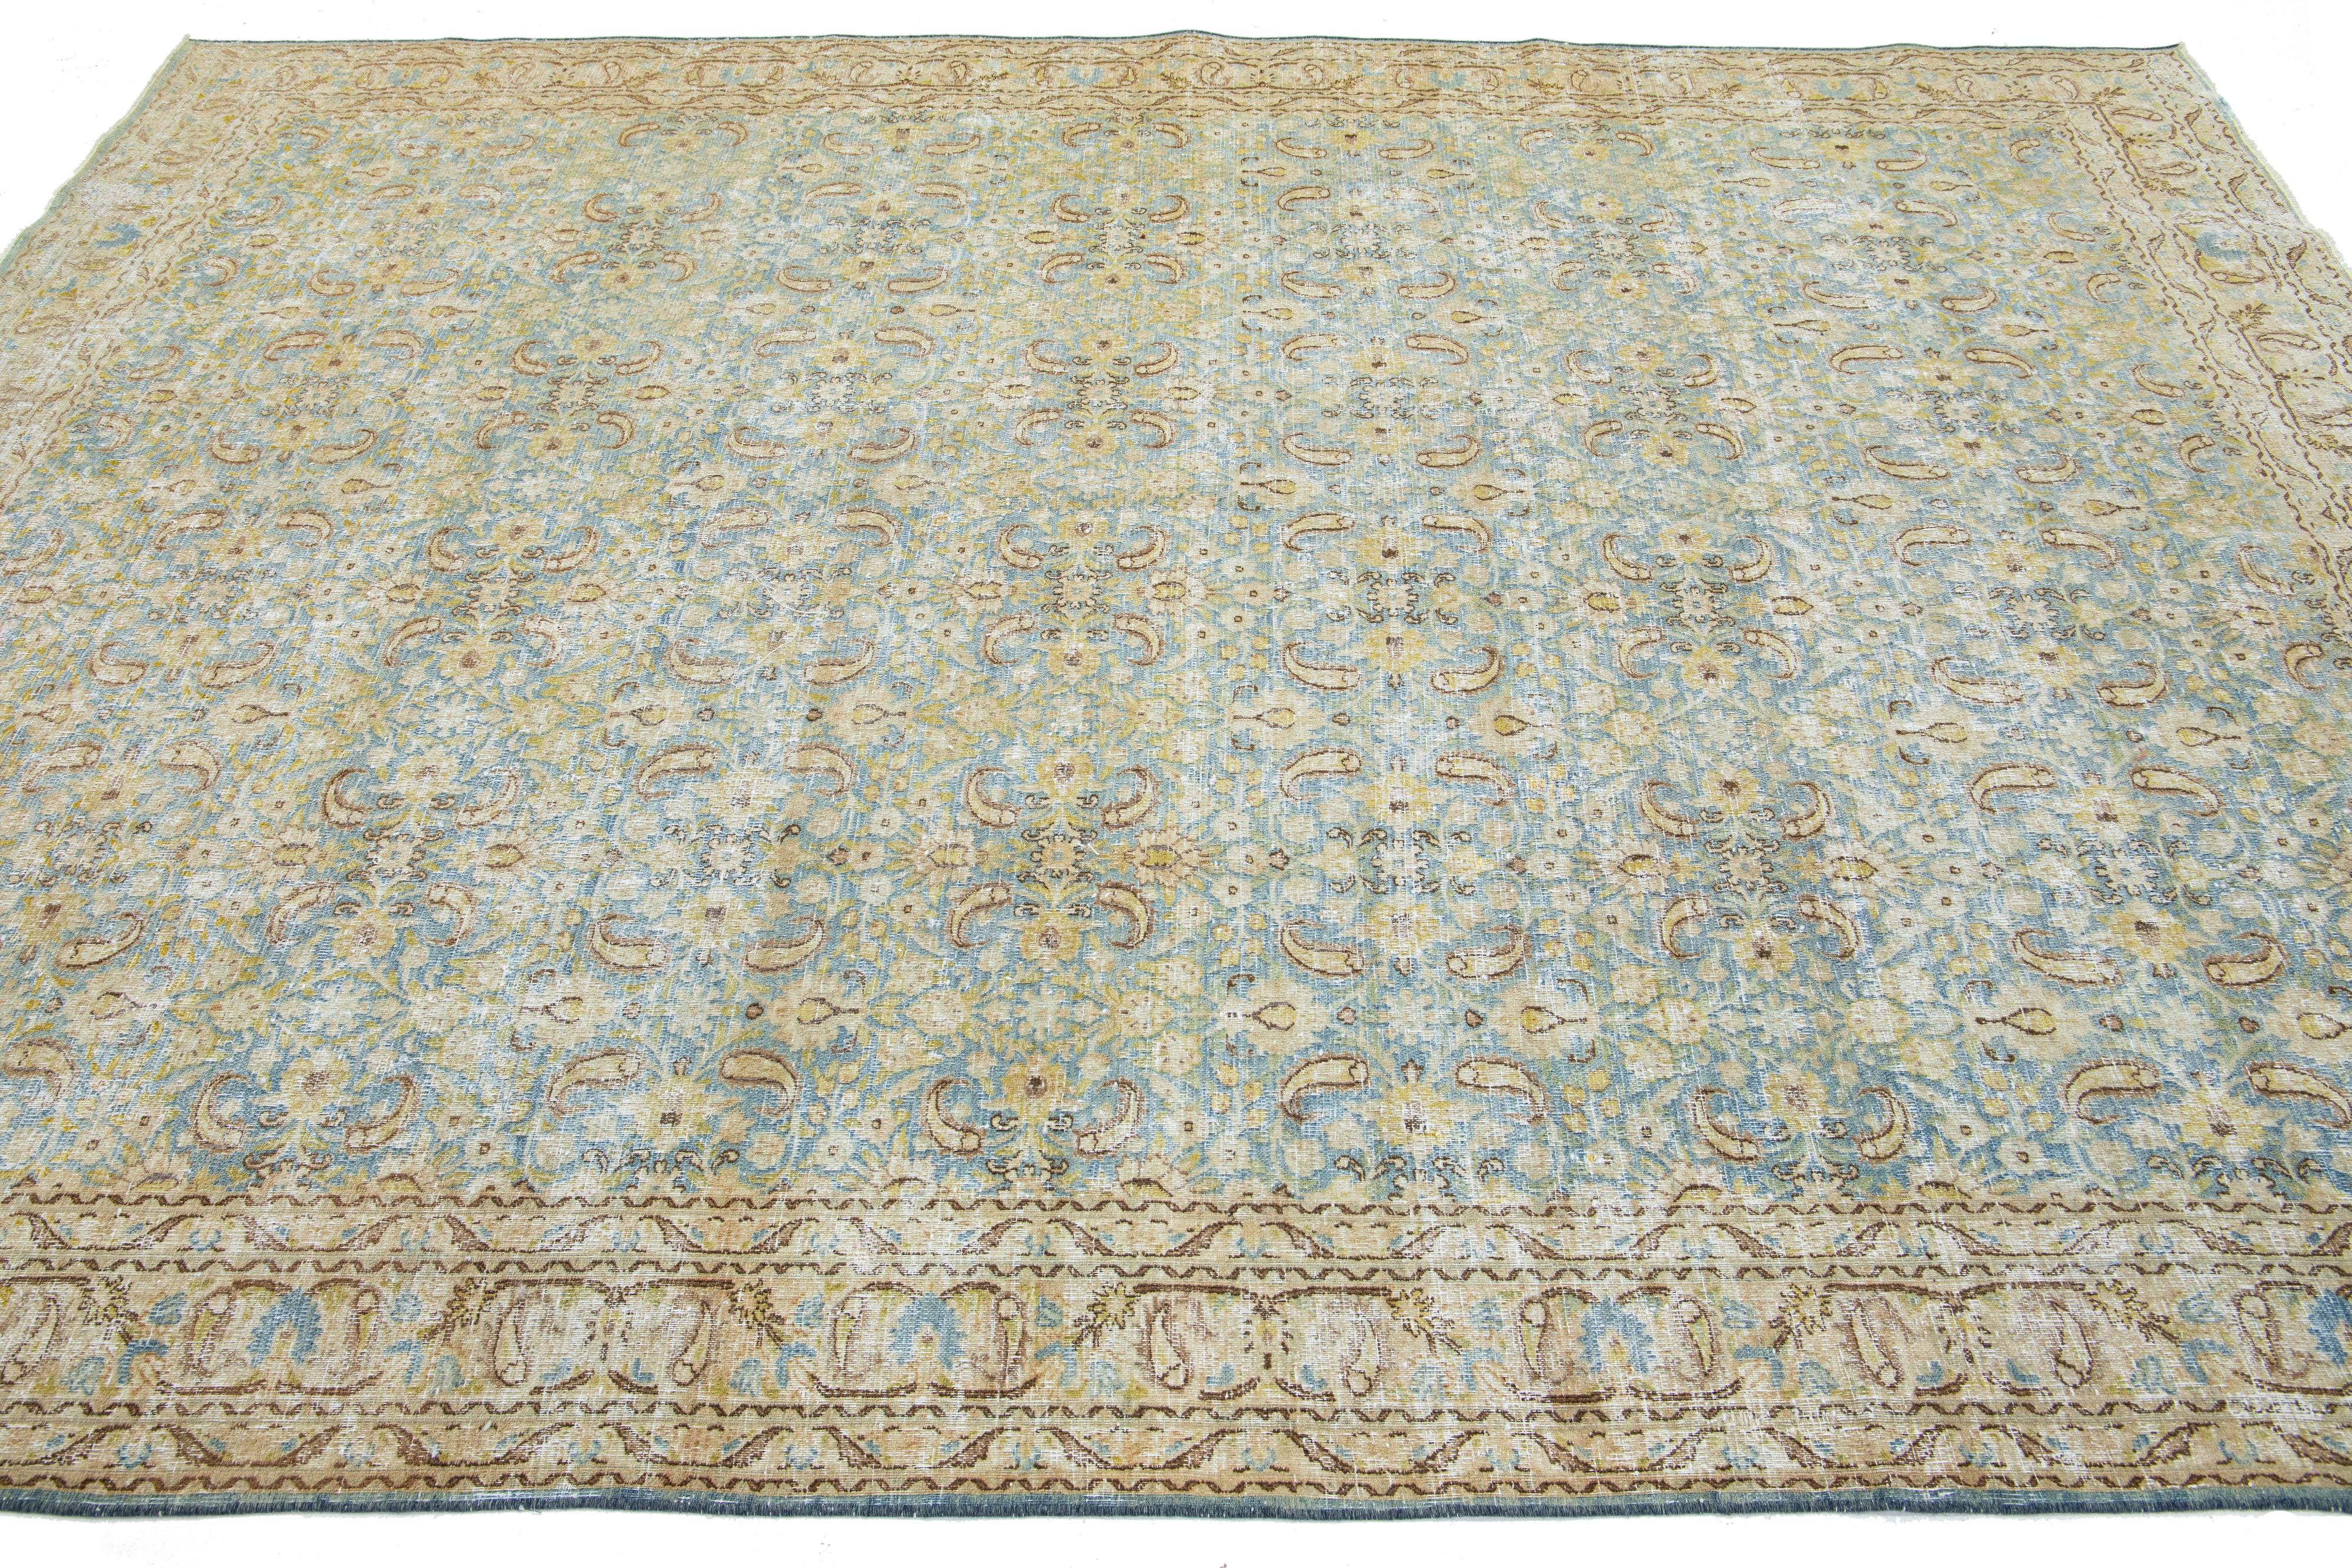  Allover Pattern Antique Persian Tabriz Wool Rug In Blue In Good Condition For Sale In Norwalk, CT